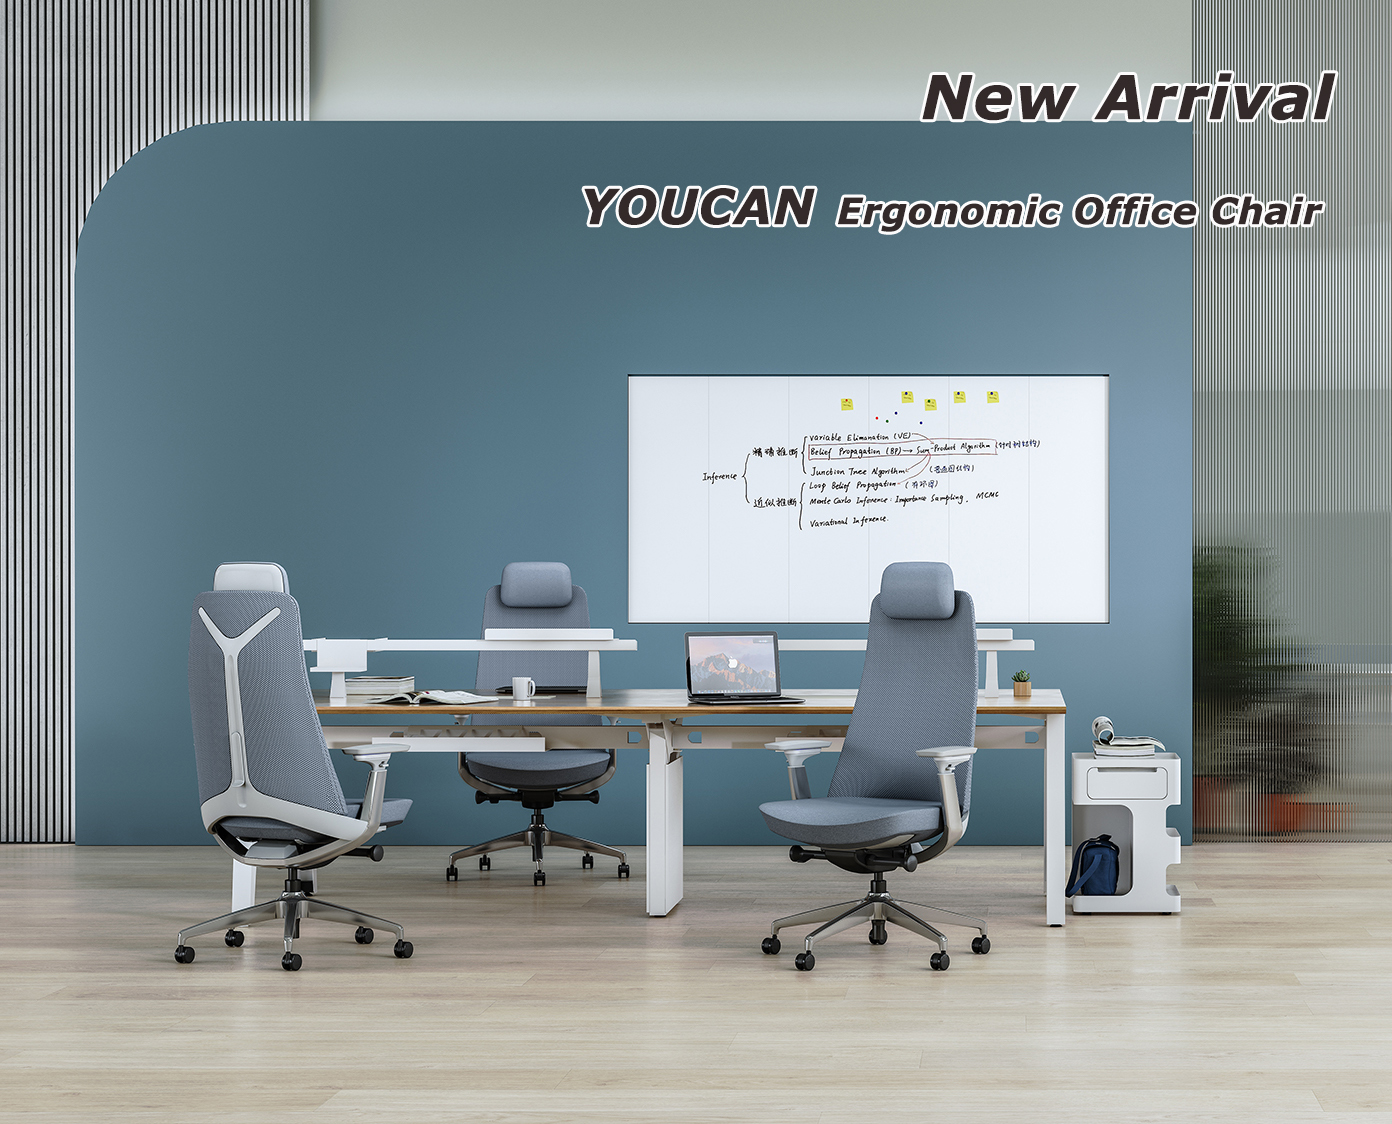 New Arrival YOUCAN Ergonomic Office Chair